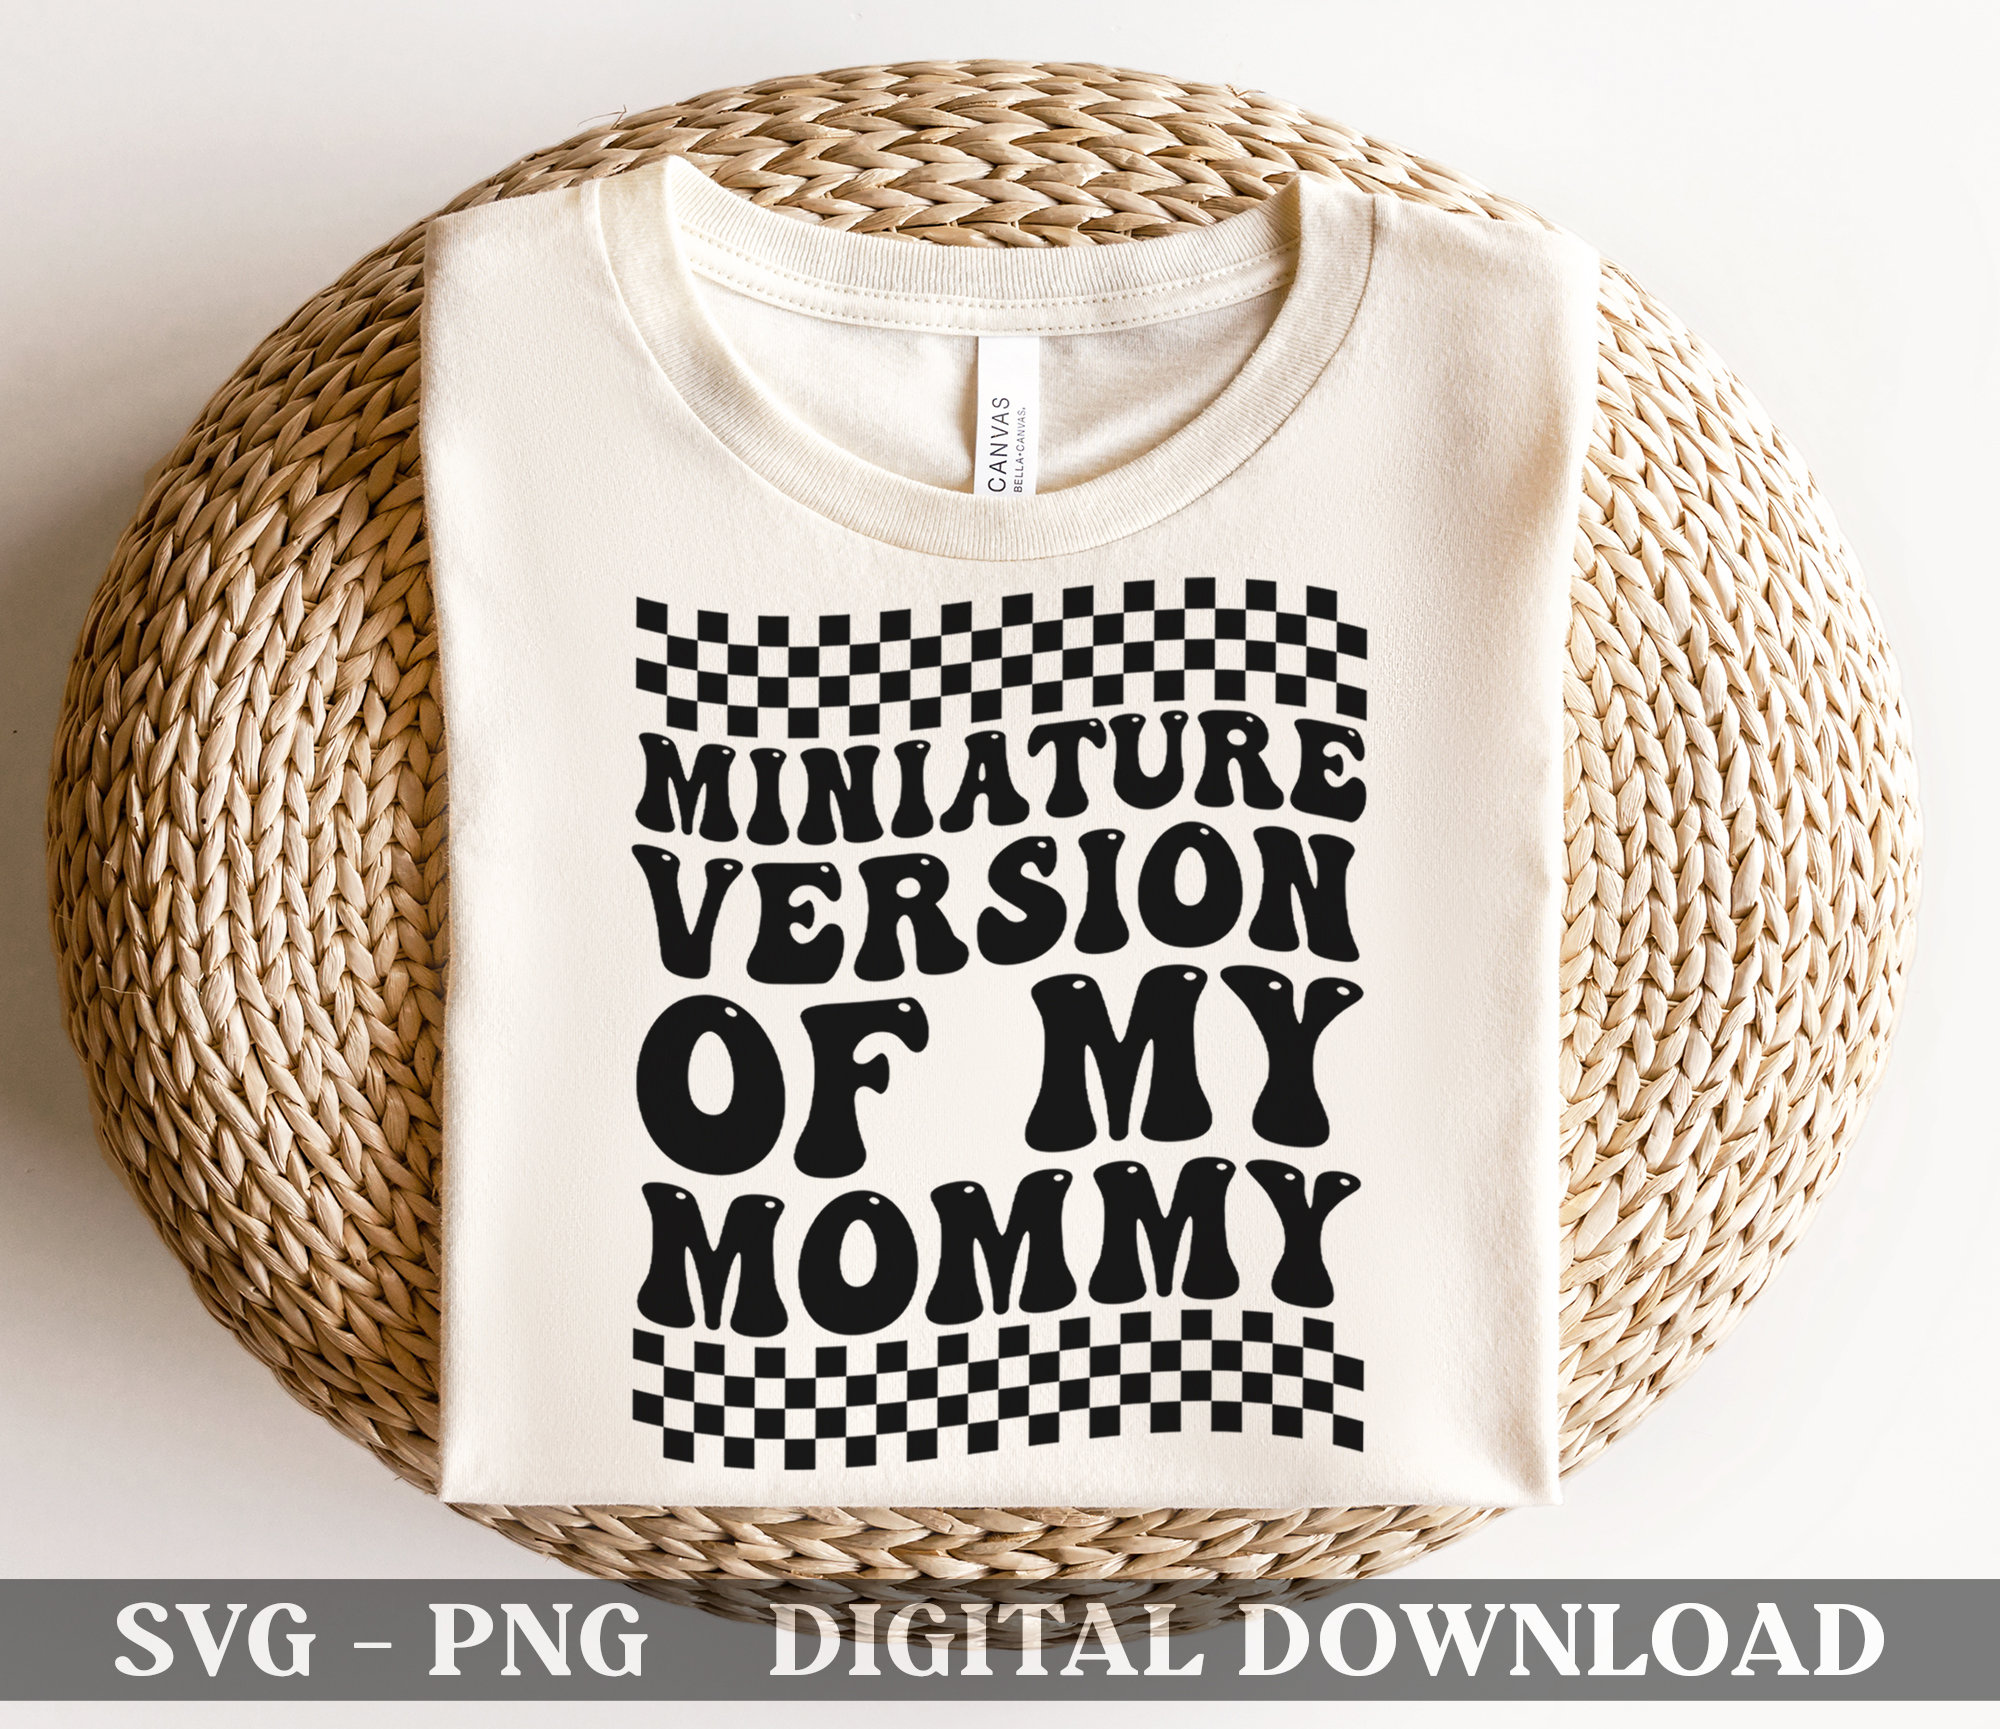 Miniature Version of My Mommy Svg Png Cutting File Mommys - Etsy